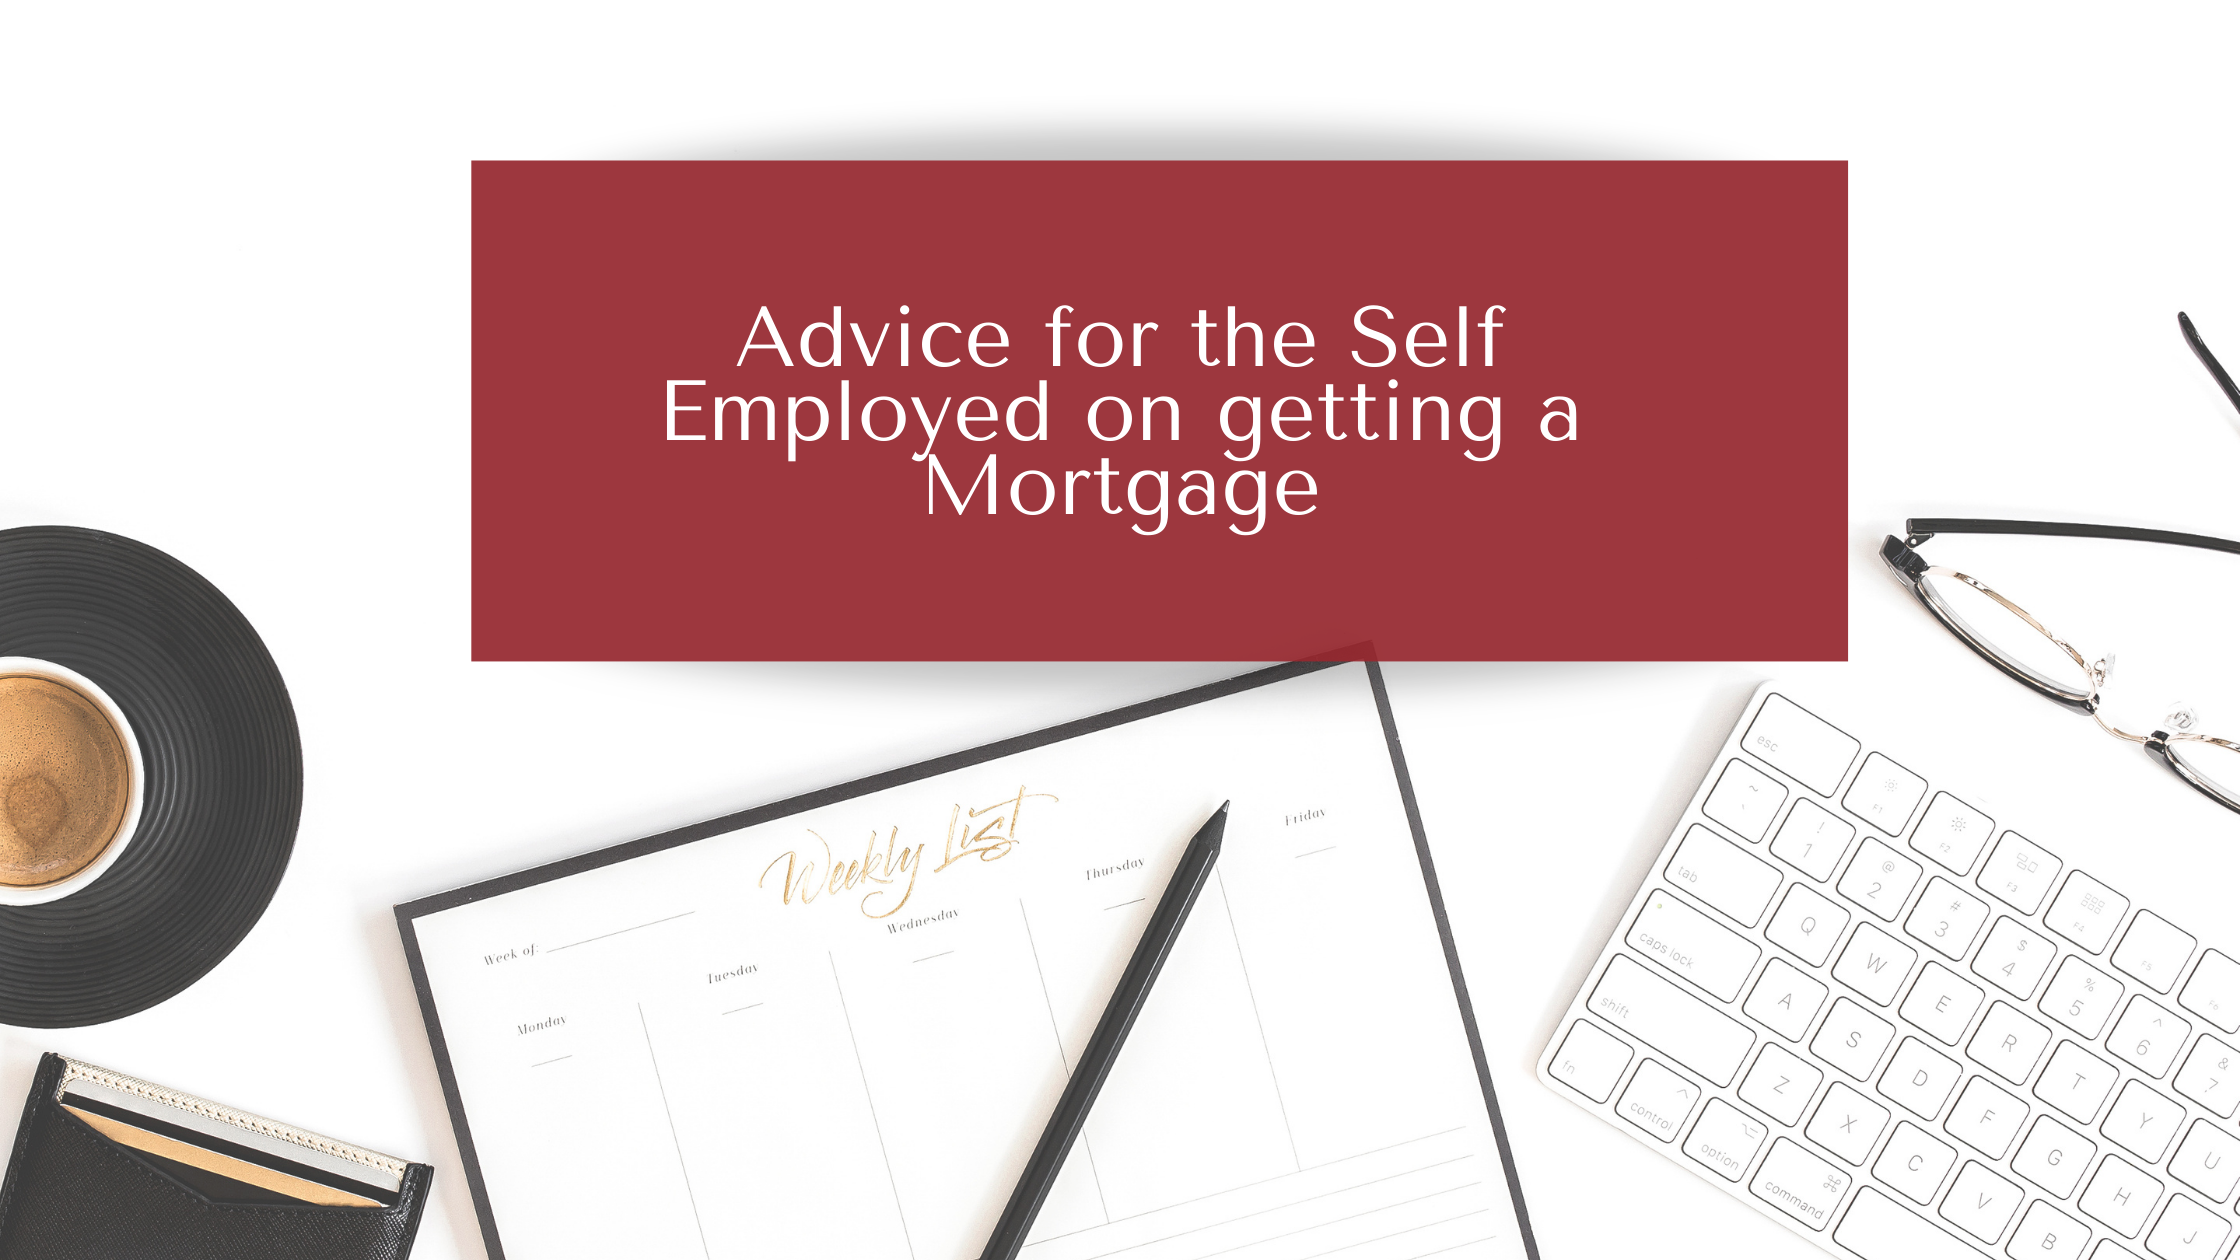 Advice for the Self Employed on getting a Mortgage